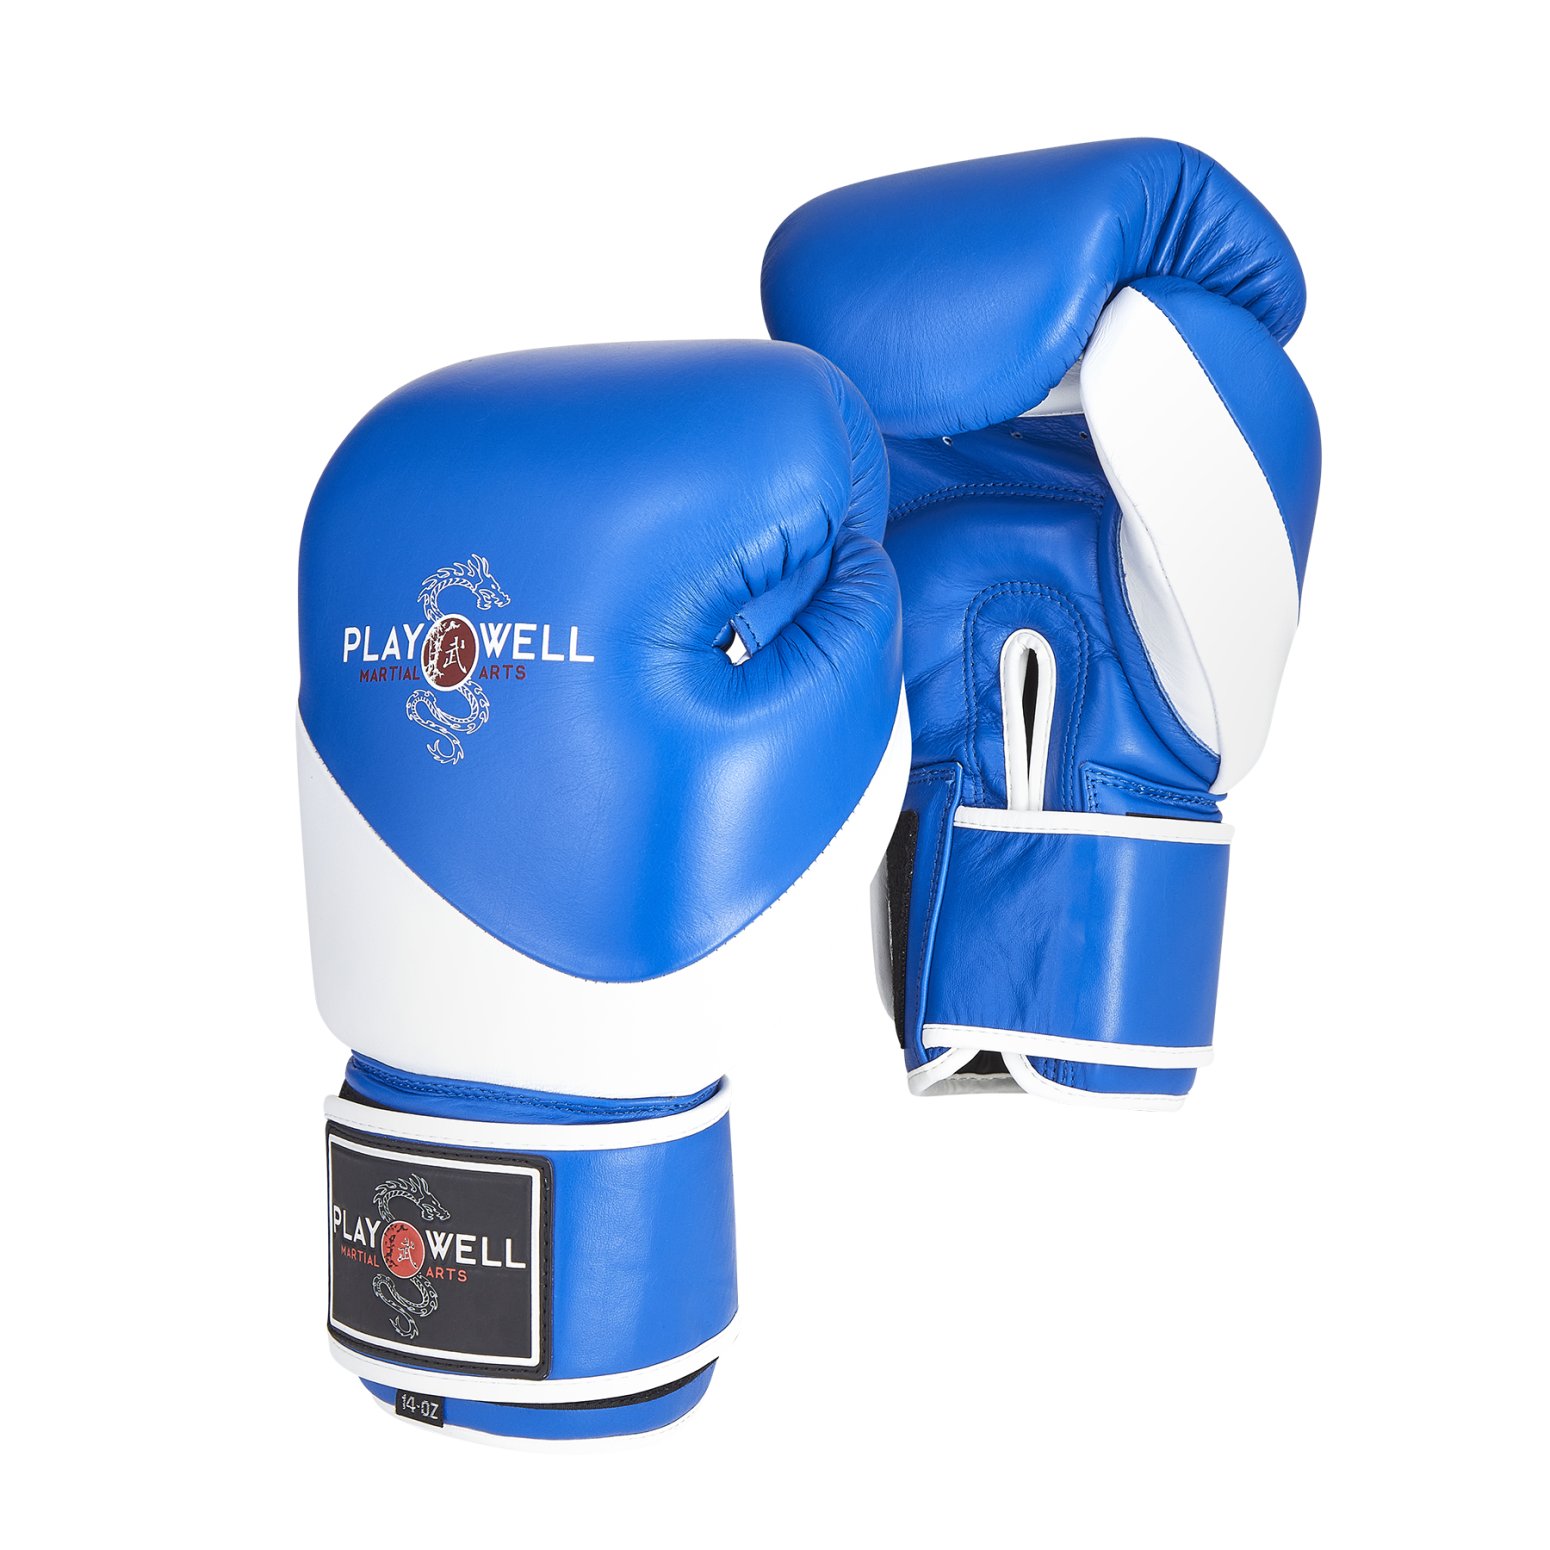 Playwell Premium "K1 Series" Leather Muay Thai Boxing Gloves - Click Image to Close